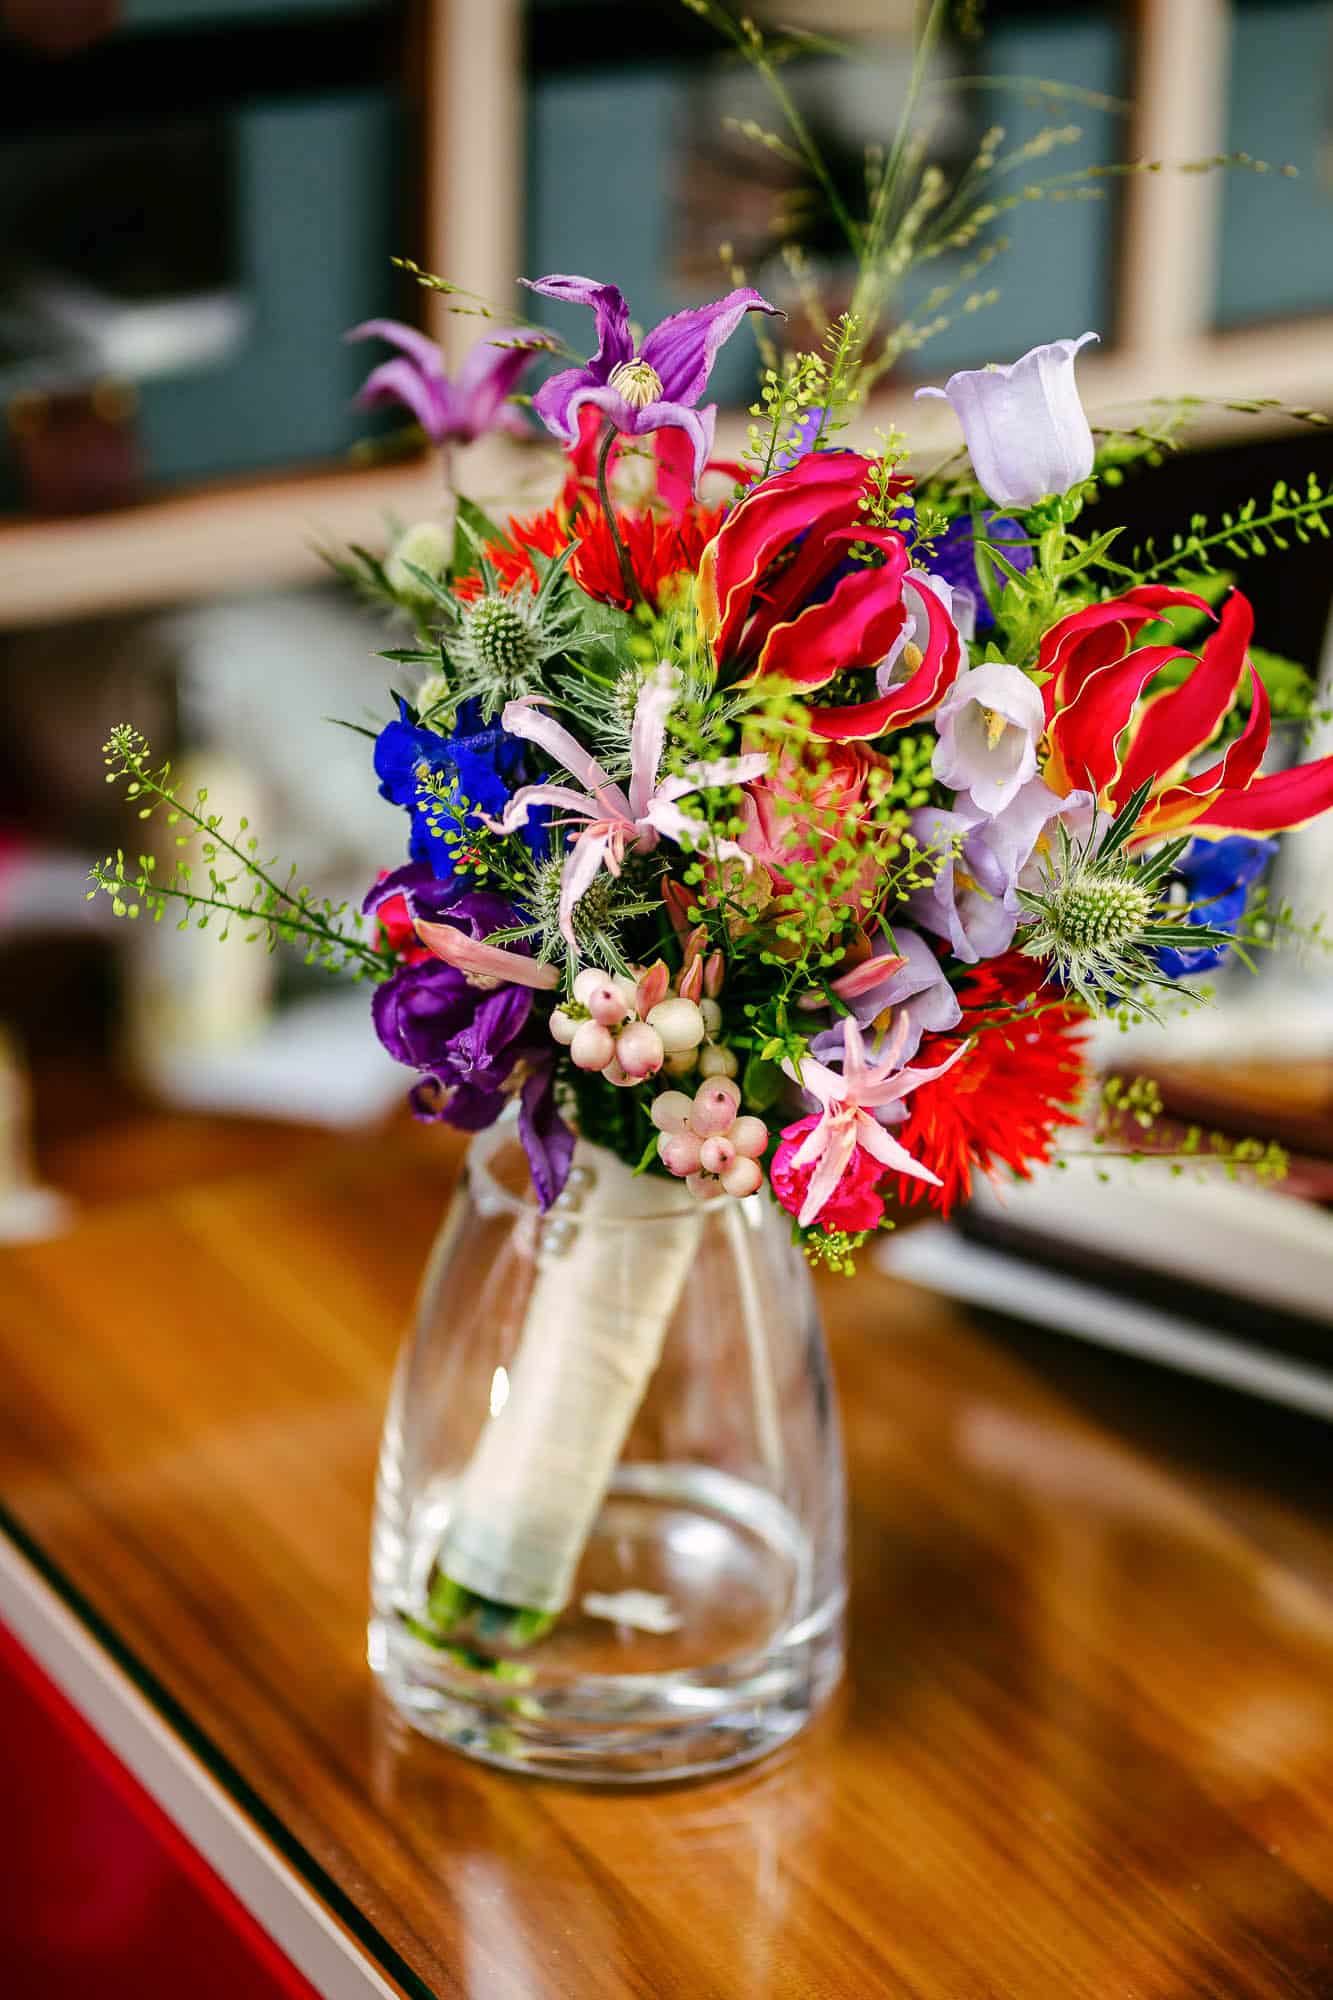 On a table is a wedding bouquet of colourful flowers.